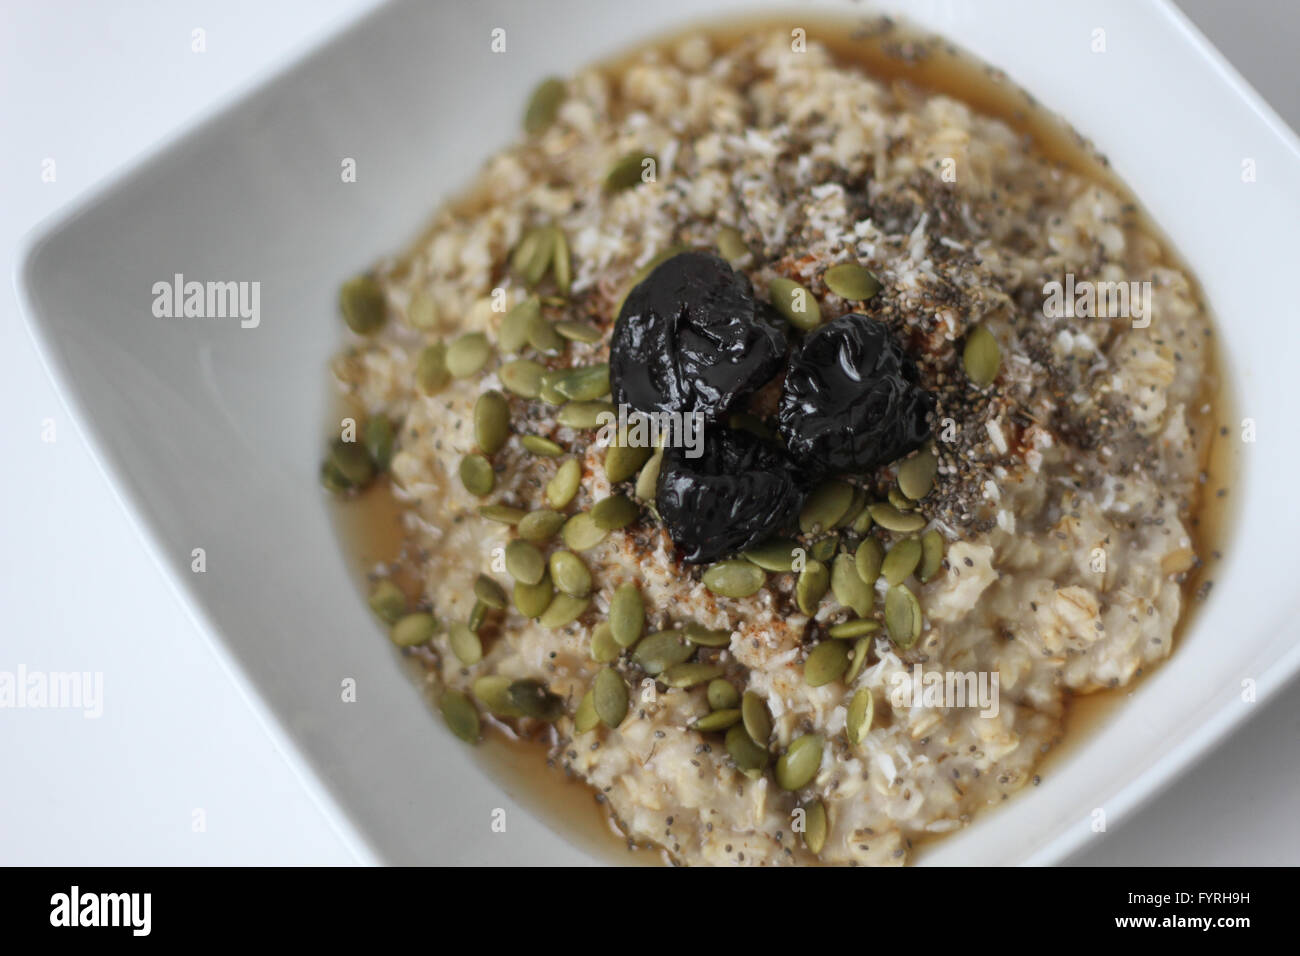 A bowl of oatmeal cereal Stock Photo